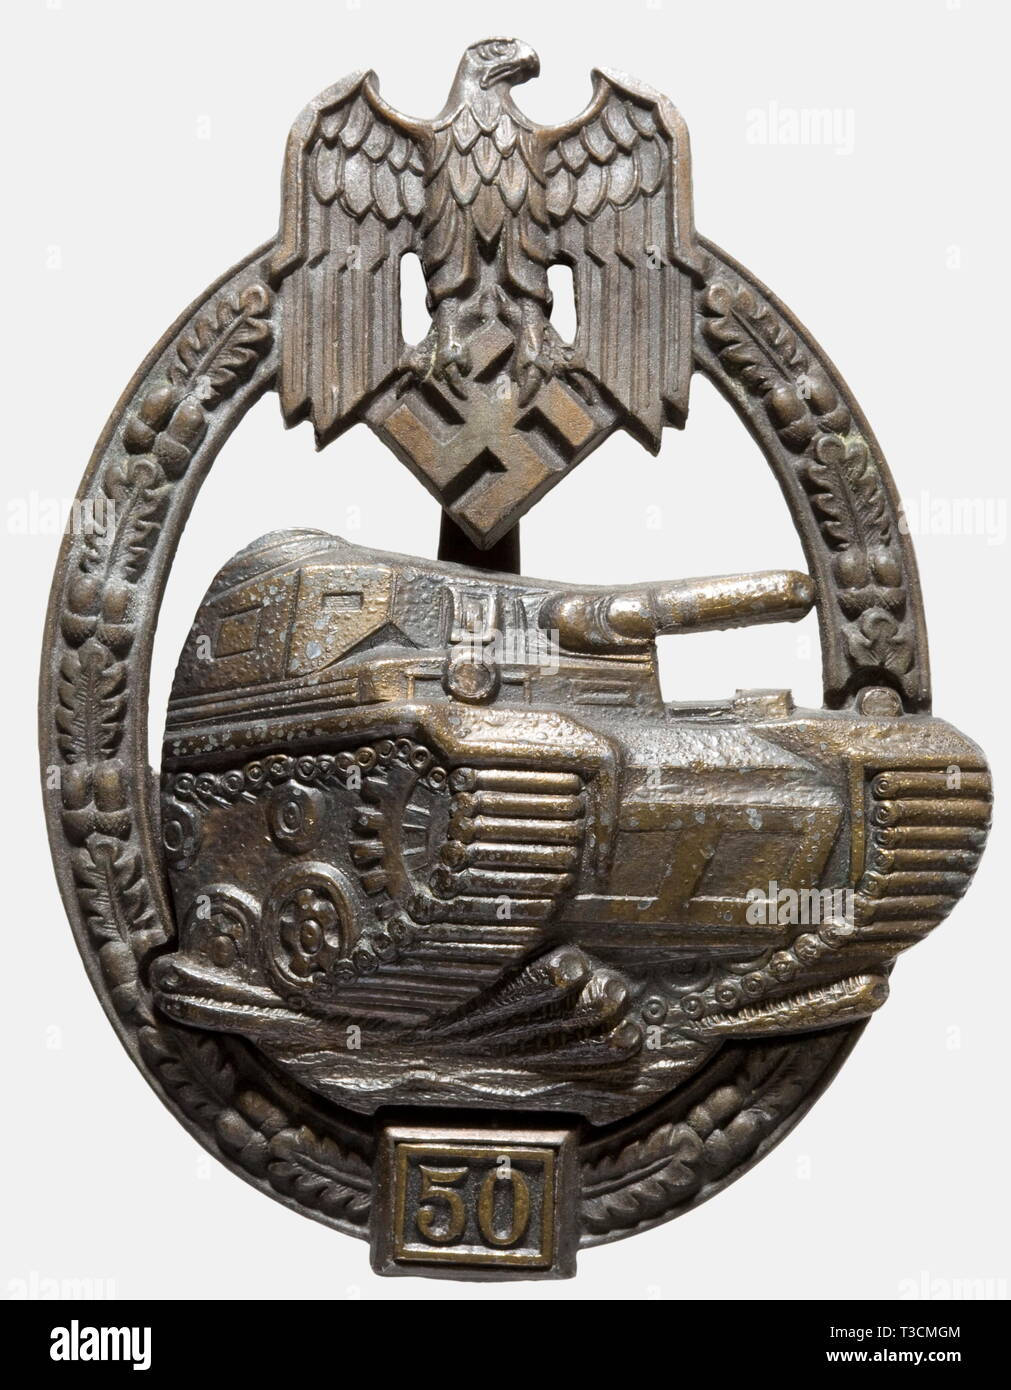 A Tank Assault Badge in Bronze, for '50' engagements Bronzed fine zinc issue without maker's mark. The solid wreath with '50' numeral plate, inset attachment pin with waisted steel needle, double riveted, hollow-stamped tank appliqué (Nie 7.06.04 c). historic, historical, 1930s, 1930s, 20th century, awards, award, German Reich, Third Reich, Nazi era, National Socialism, object, objects, stills, medal, decoration, medals, decorations, clipping, cut out, cut-out, cut-outs, honor, honour, National Socialist, Nazi, Nazi period, symbol, symbols, emblem, emblems, insignia, Editorial-Use-Only Stock Photo